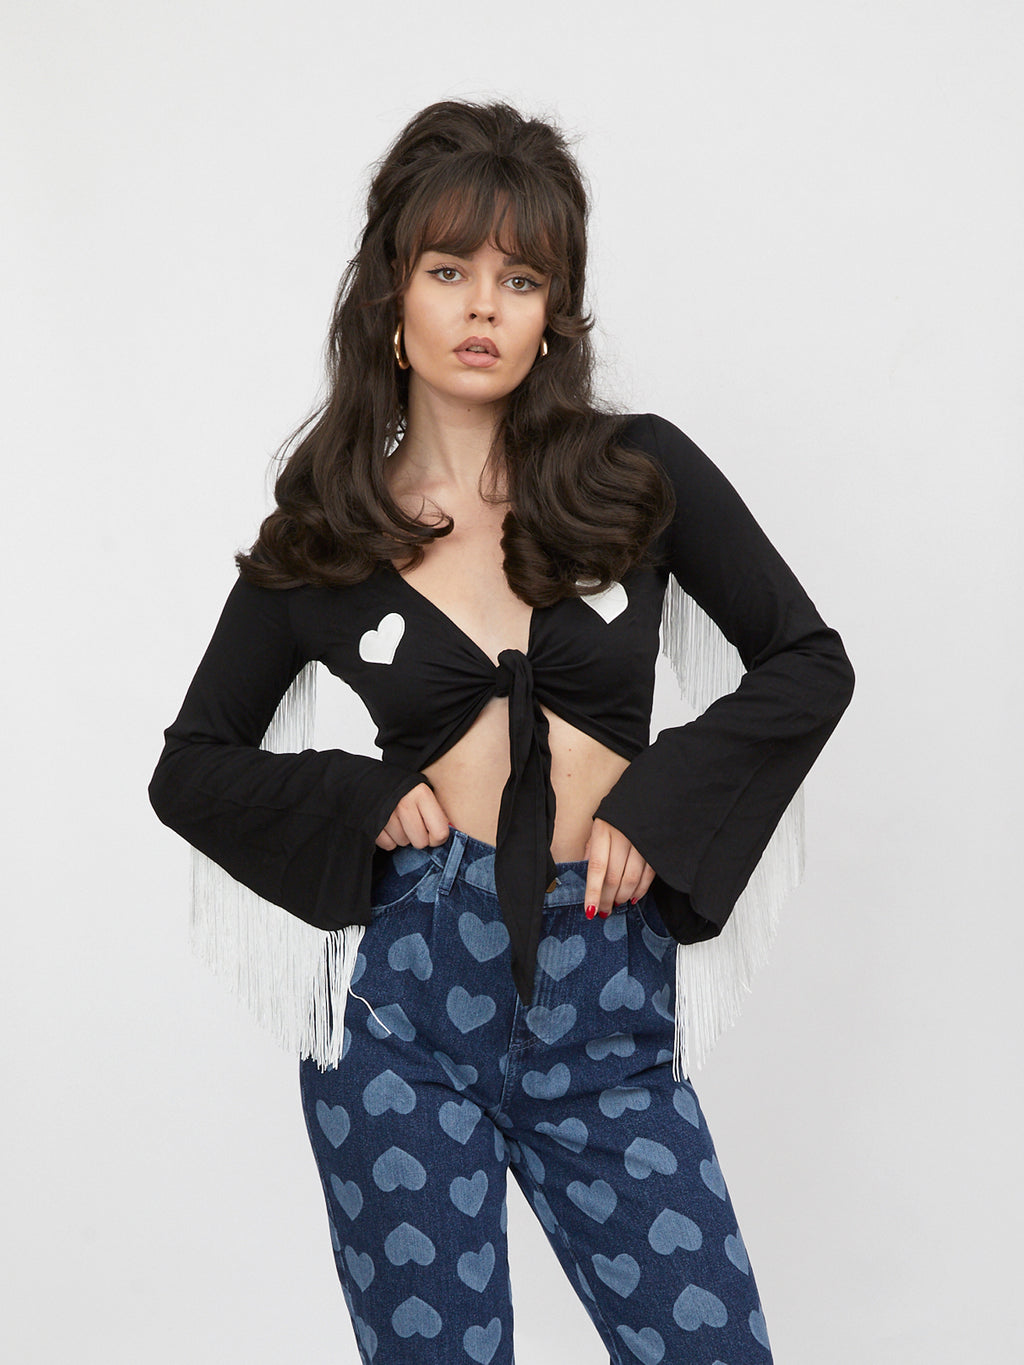 Lazy Oaf Howdy Partner Tie Up Top